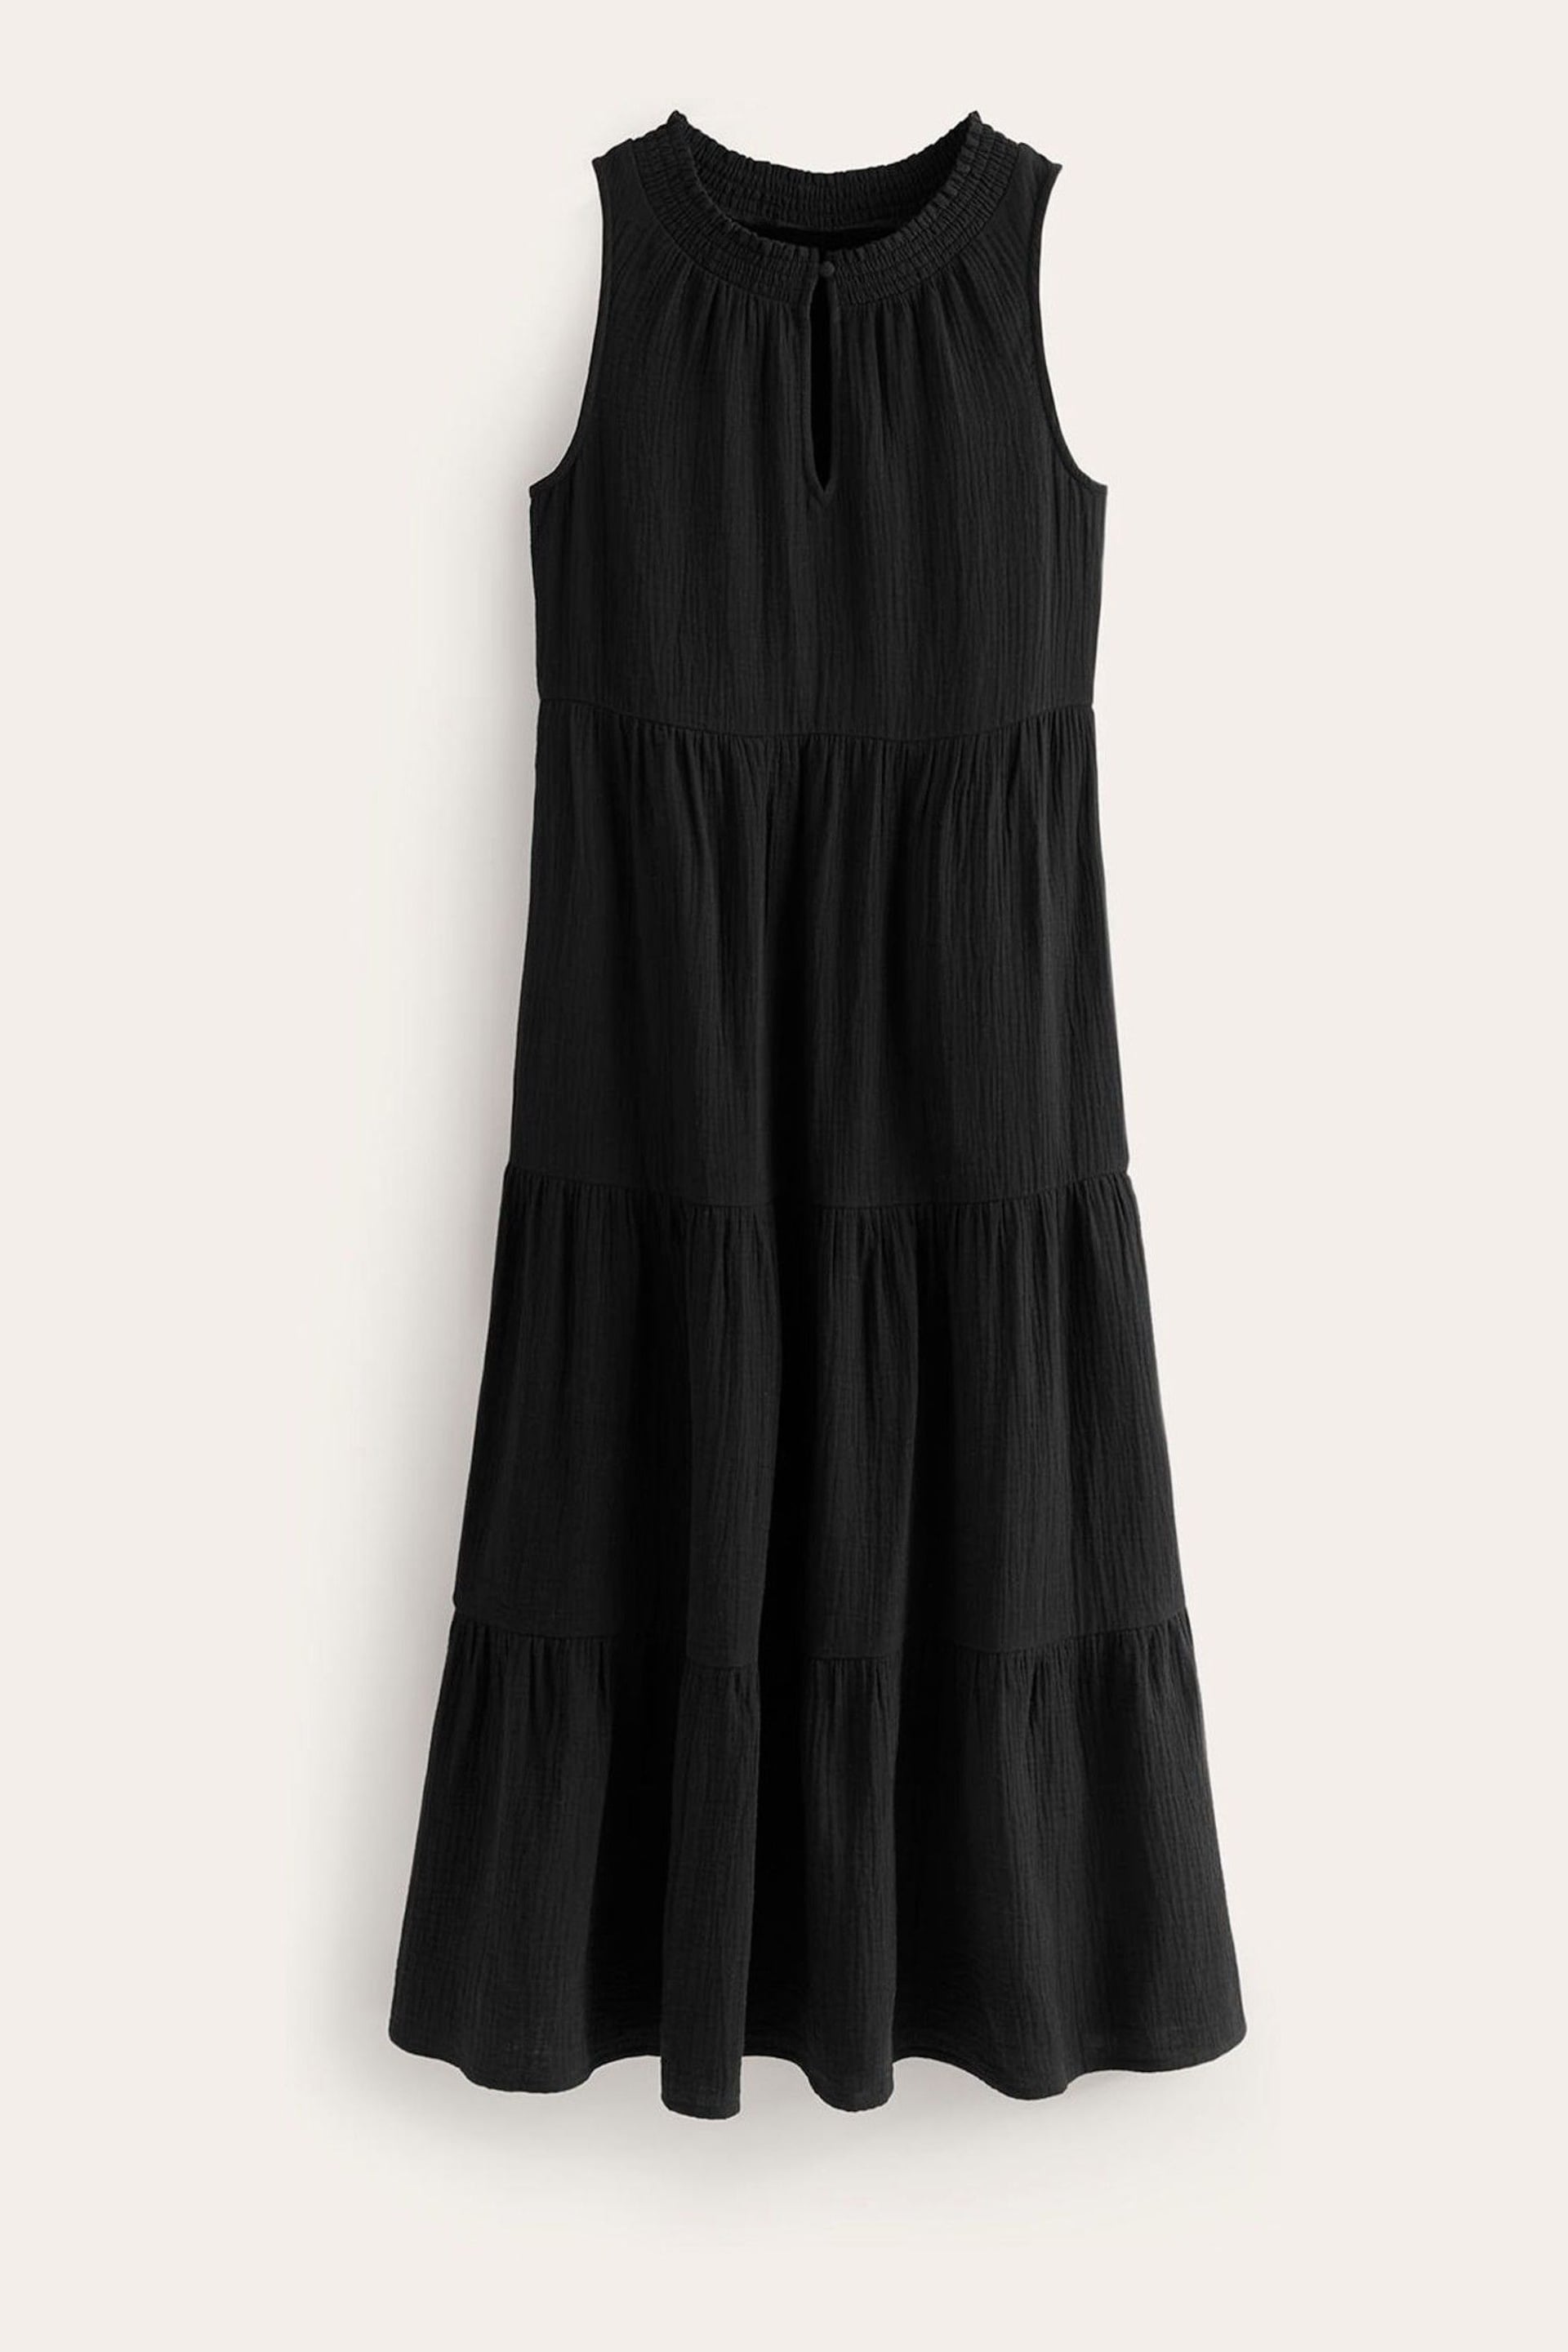 Boden Black Petite Double Cloth Maxi Tiered Dress - Image 5 of 5